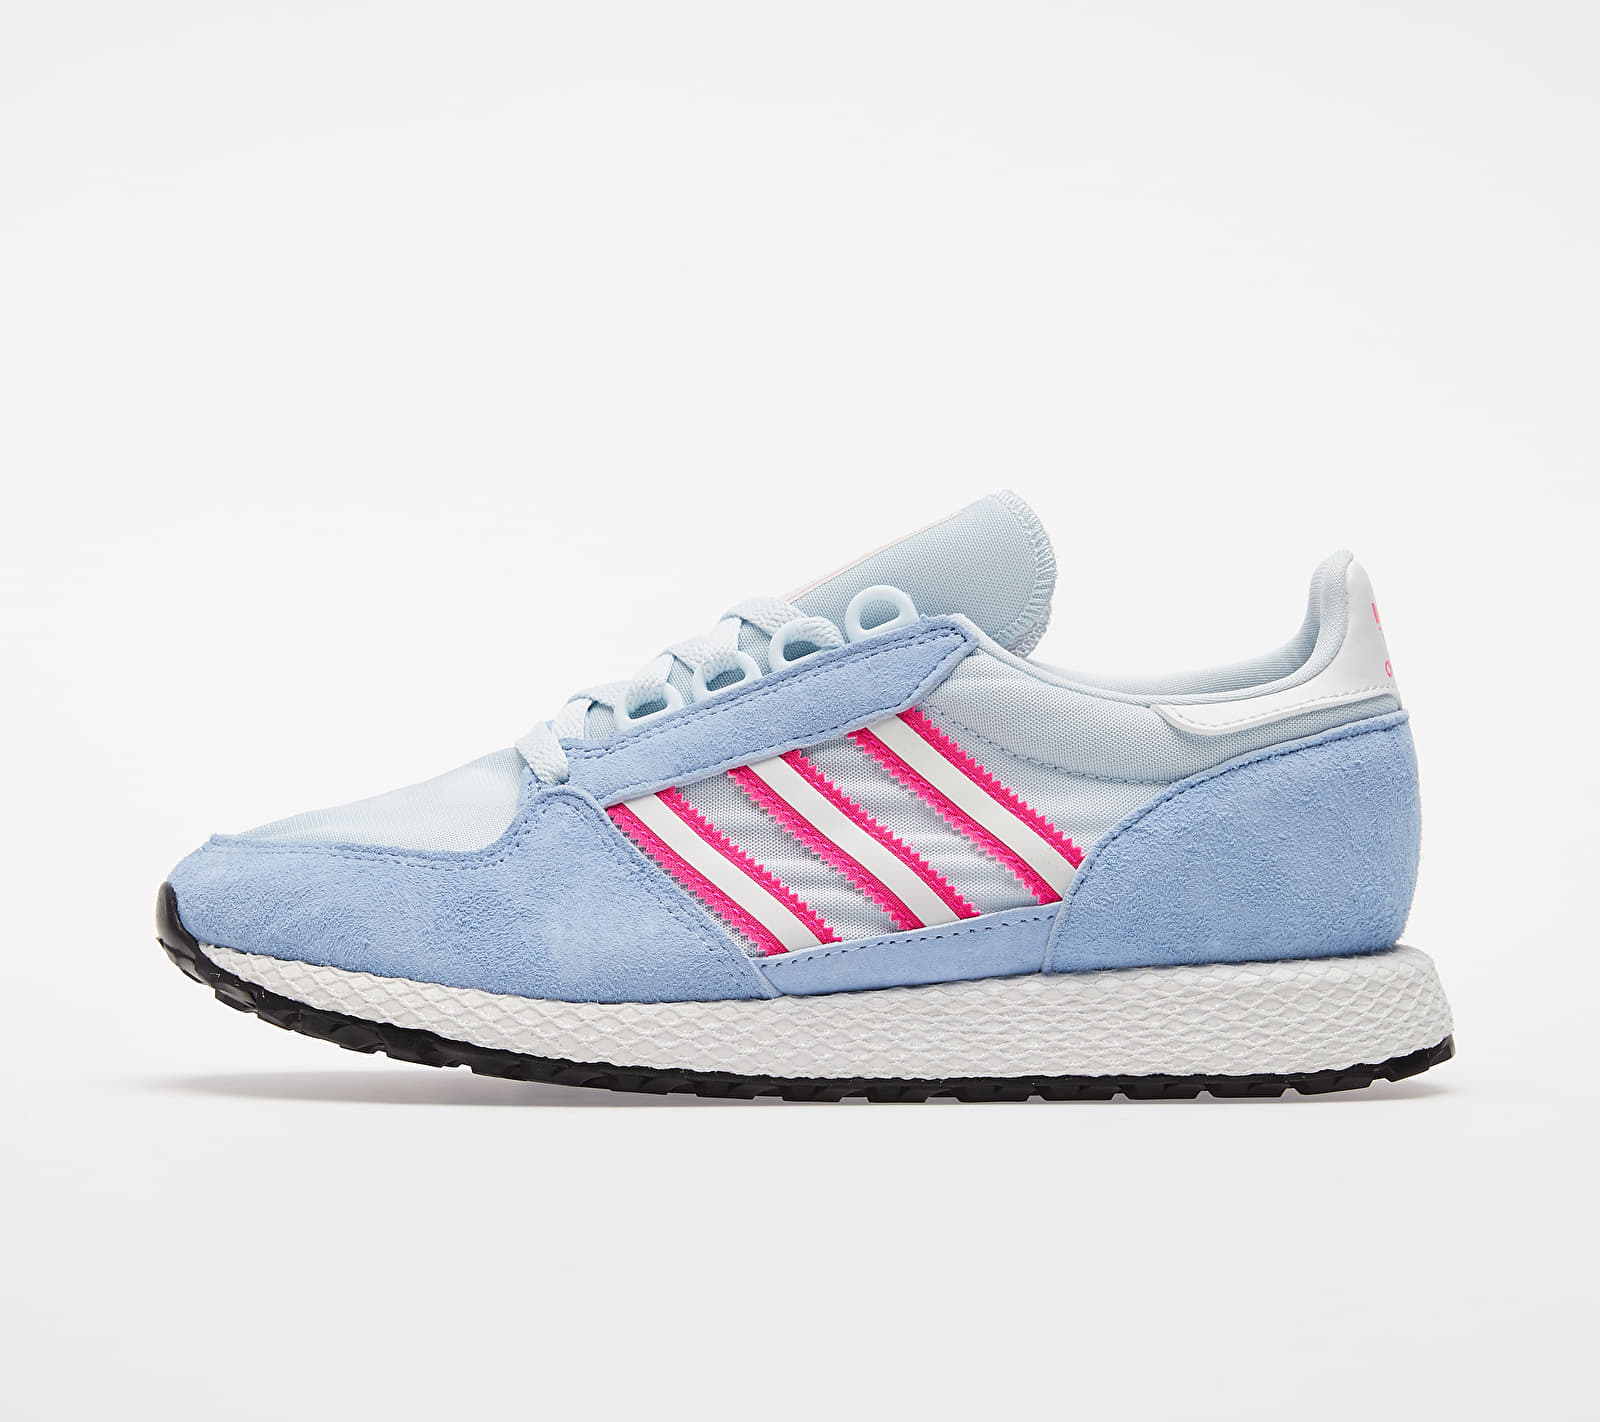 adidas Forest Grove W Periwinkle/ Crystal White/ Shock Pink EH0321